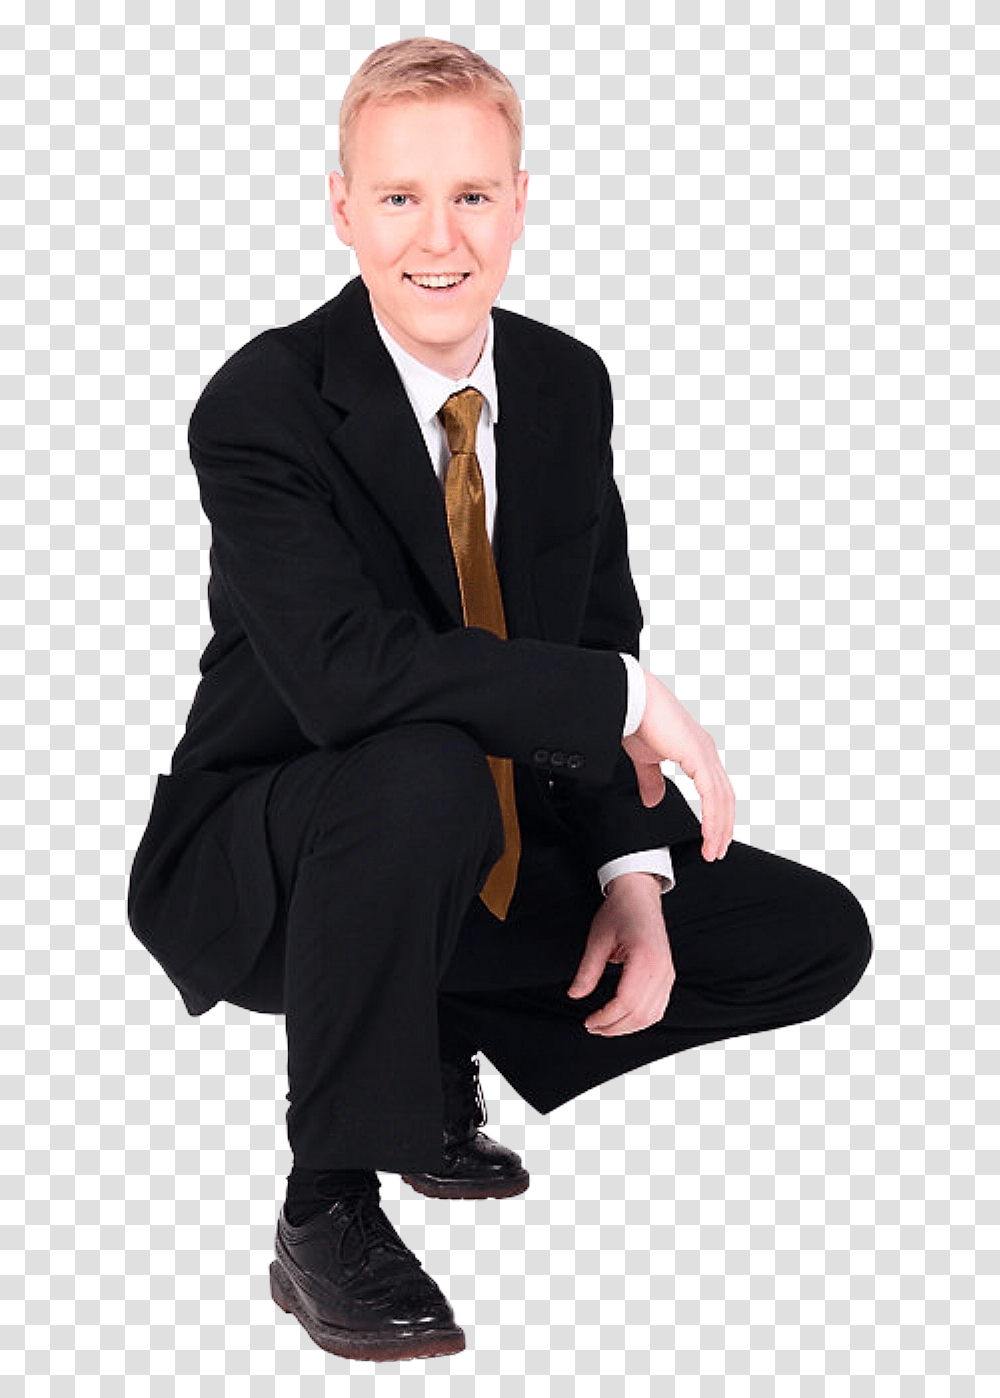 Businessman Images Free Download, Tie, Accessories, Sitting, Person Transparent Png